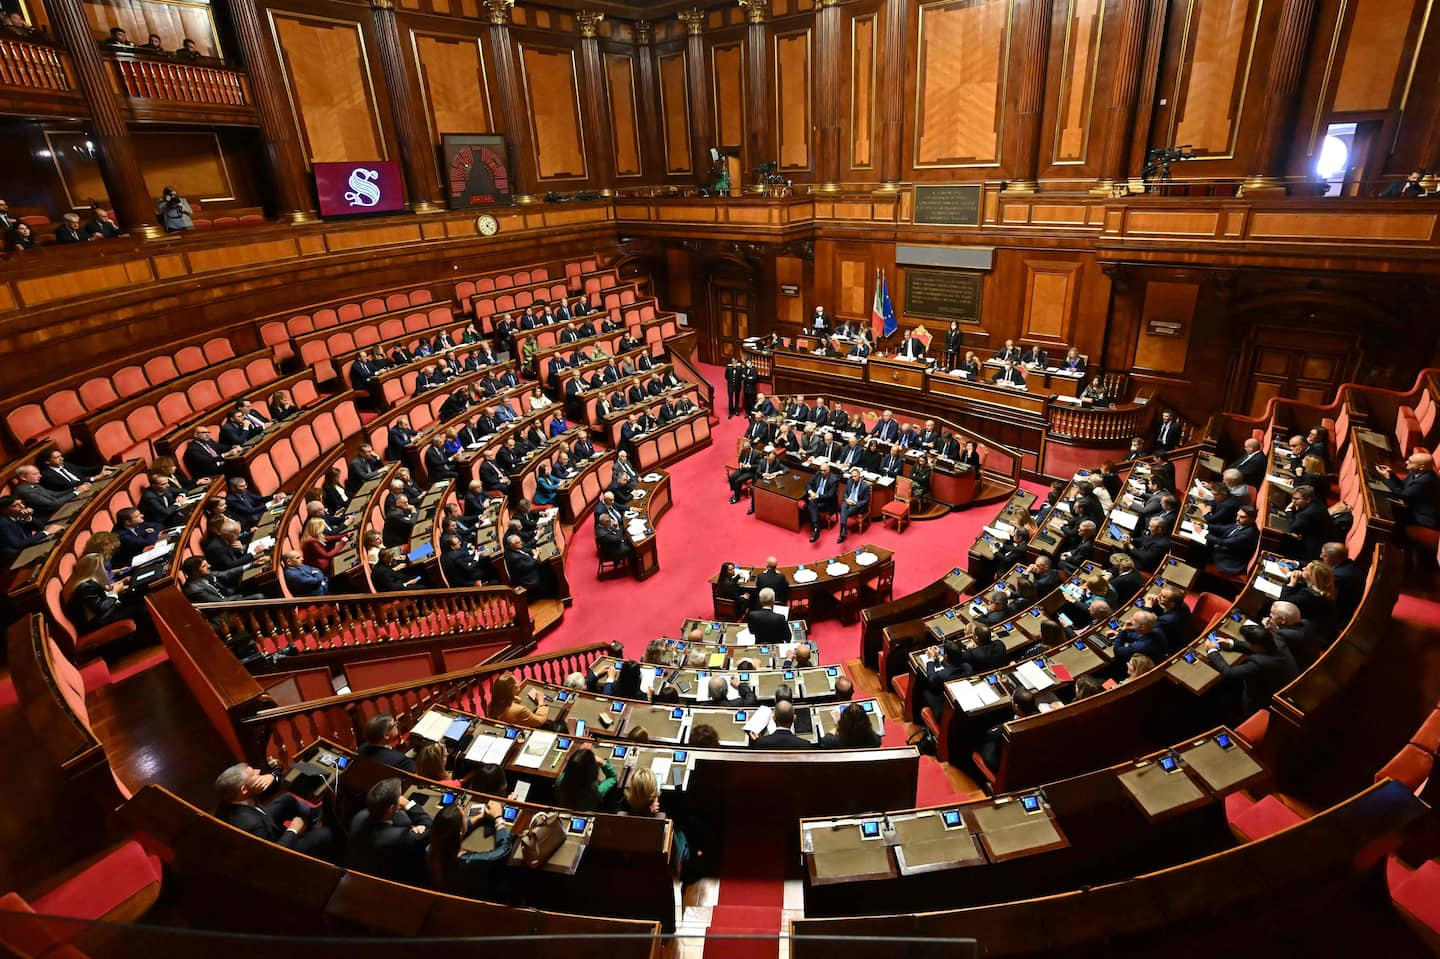 Italy: referral to court of environmental activists who sprayed paint on the Senate